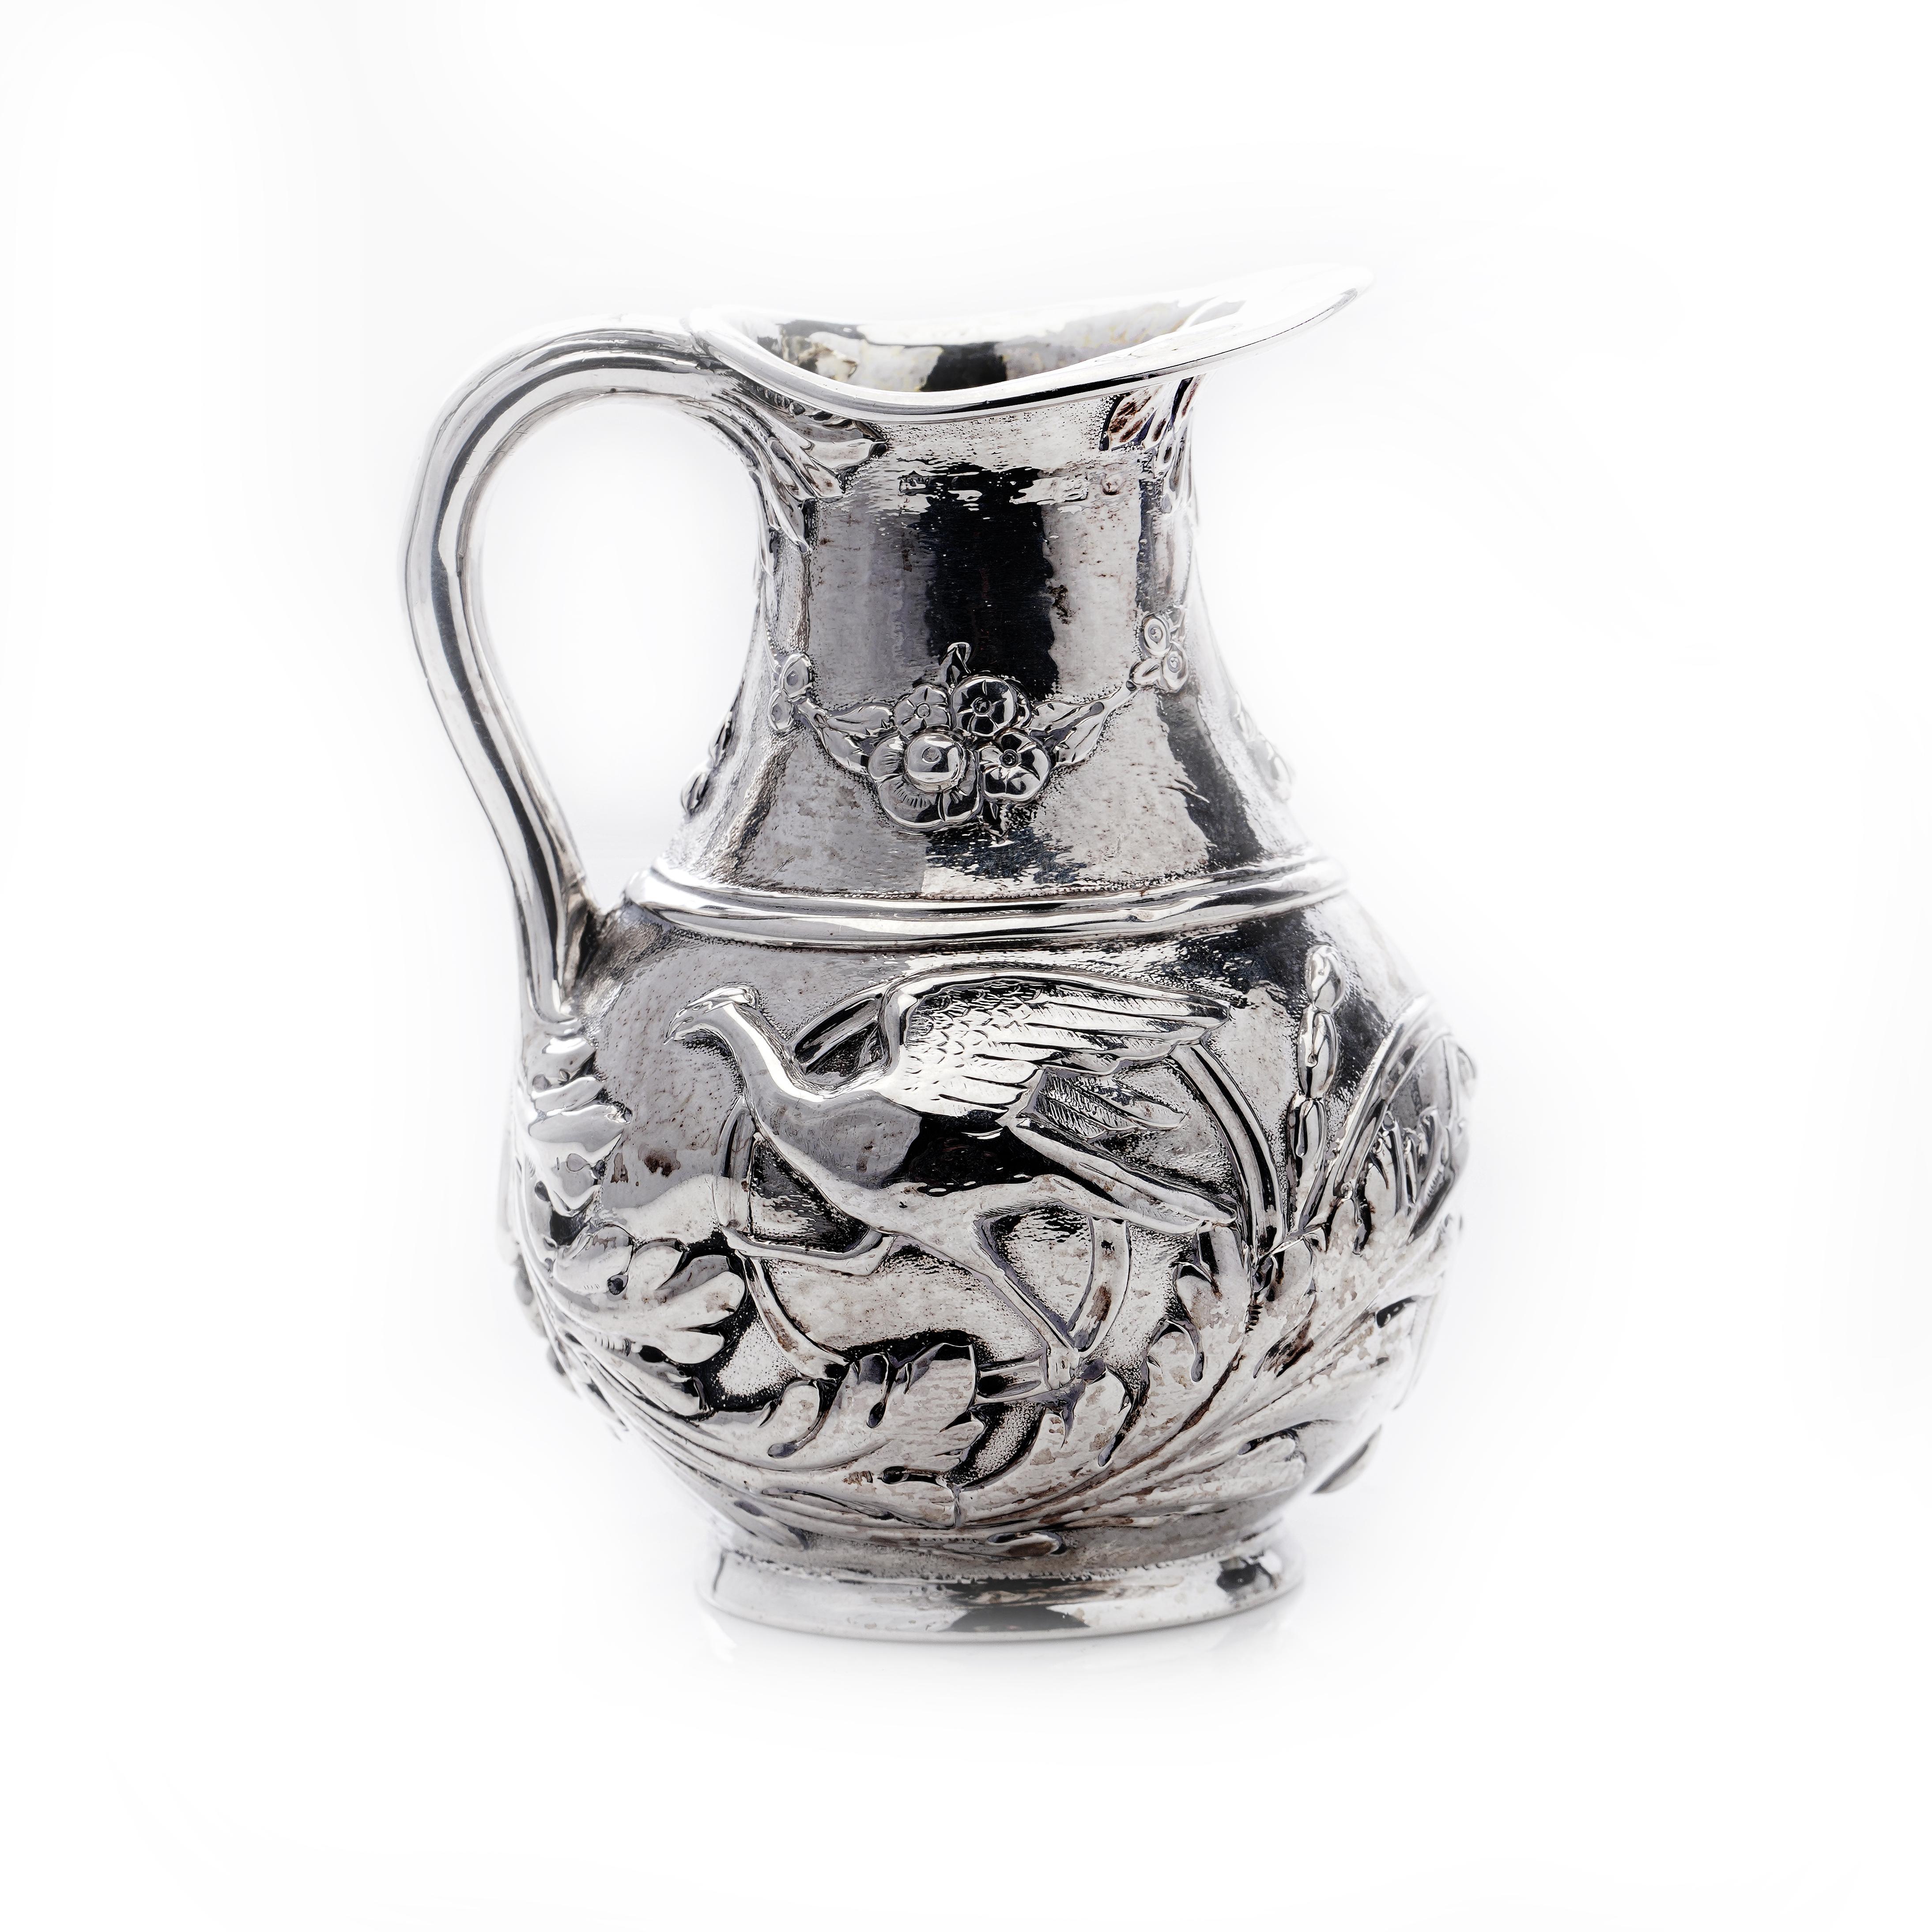 Antique Victorian sterling silver small cream jug with scenes. 
Made in England, Ca.1870's 
Maker: Maker's mark is partially faded. 

Approx. Dimensions - 
Diameter x height: 6.5 x 8.5 cm 
Weight: 83 grams in total. 

Condition: Jug is in